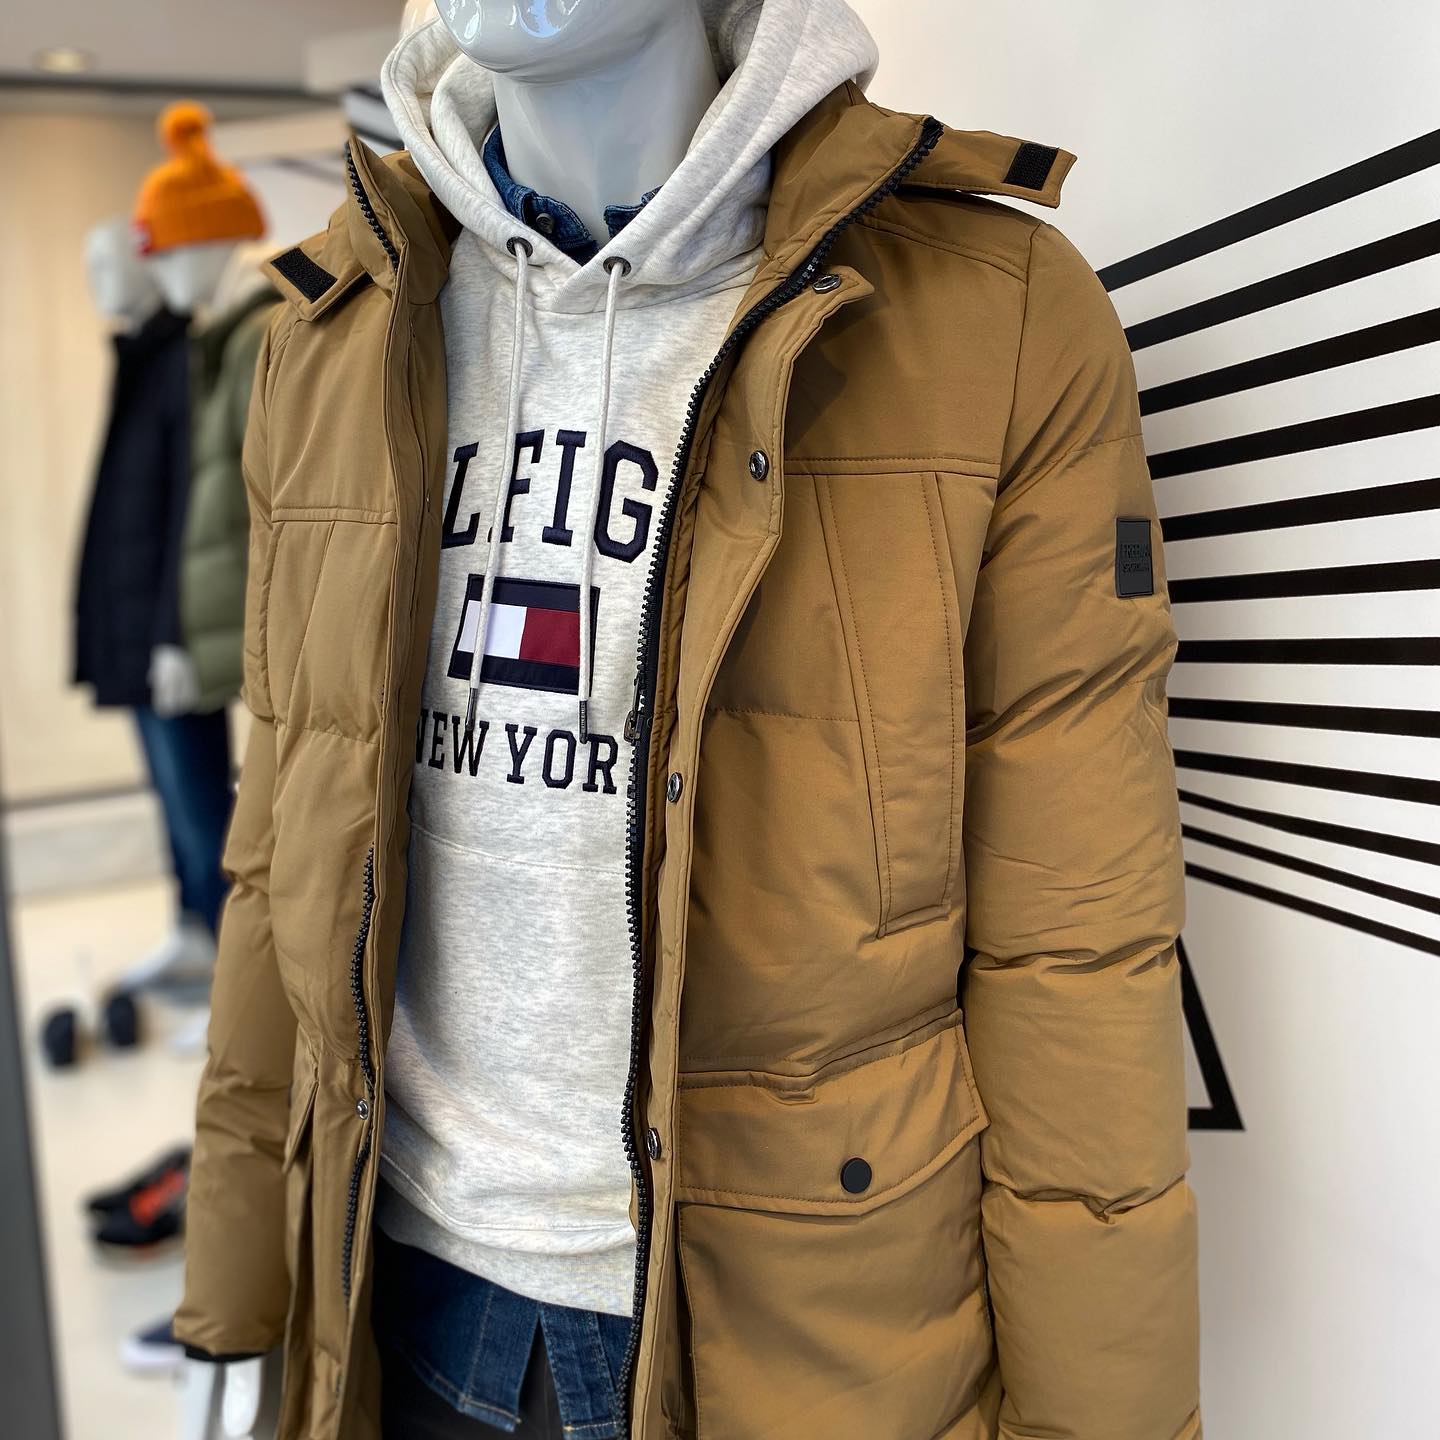 Today’s outfit : 
Tommy Hilfiger hoodie+denim shirt and Freeman jacket is a perfect match⚡️
#fw2223 #tommyhilfiger #laios #laiosfashion 
_________________________________________
Available at www.laiosfashion.gr